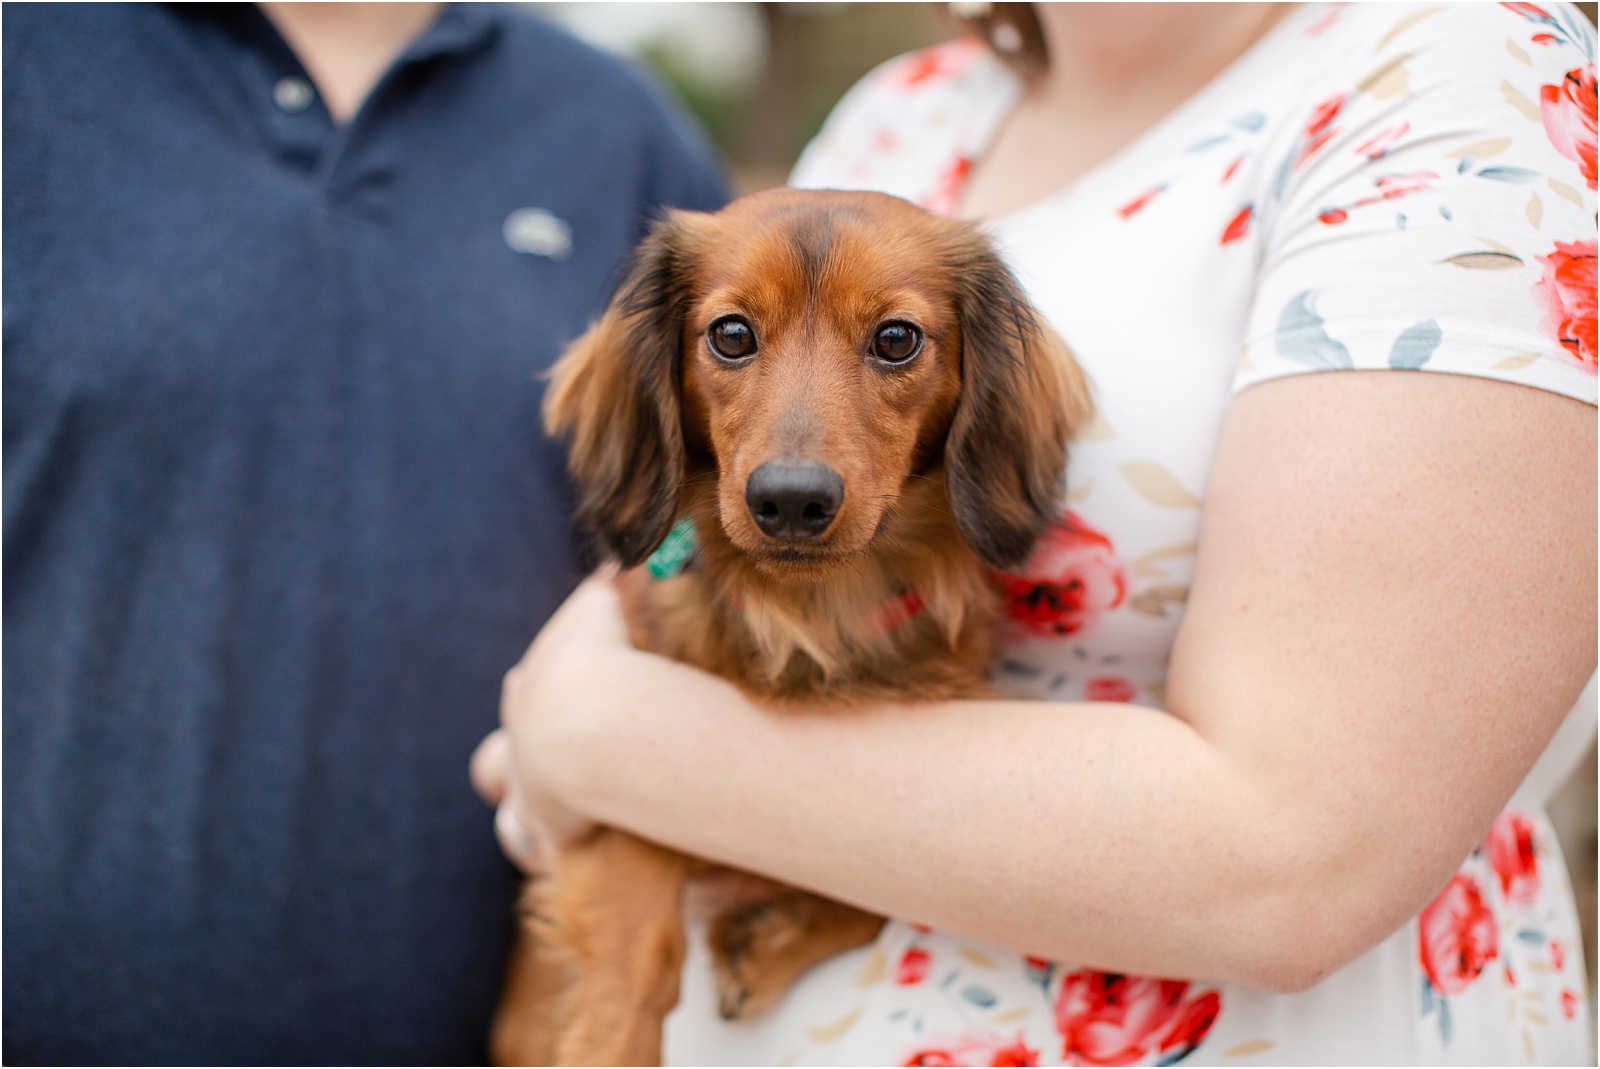 Weiner dog being held during photo session